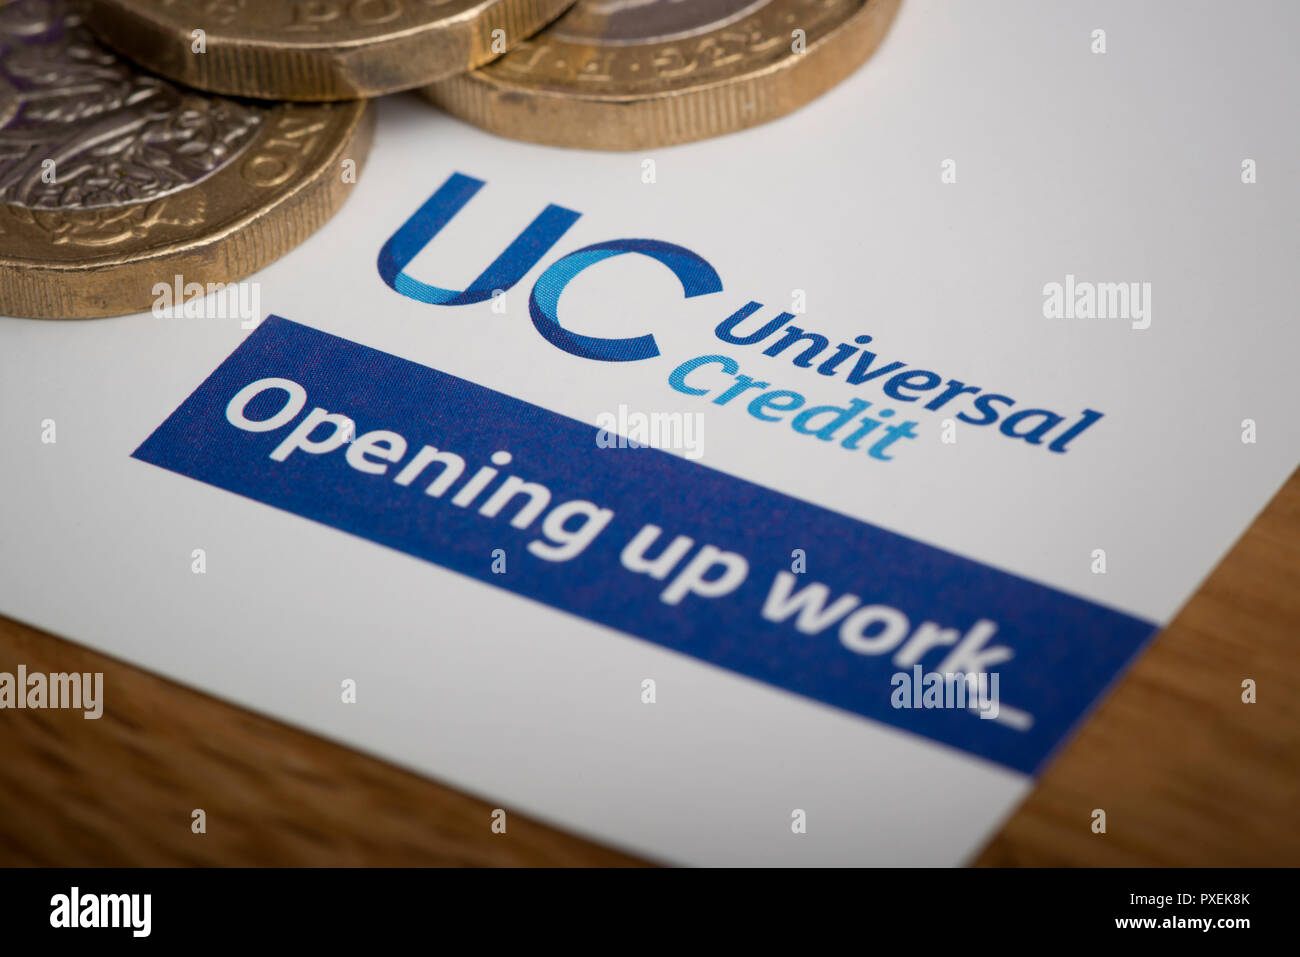 A piece of stationery featuring the Universal Credit logo, rests on a table along with some £1 coins. Stock Photo